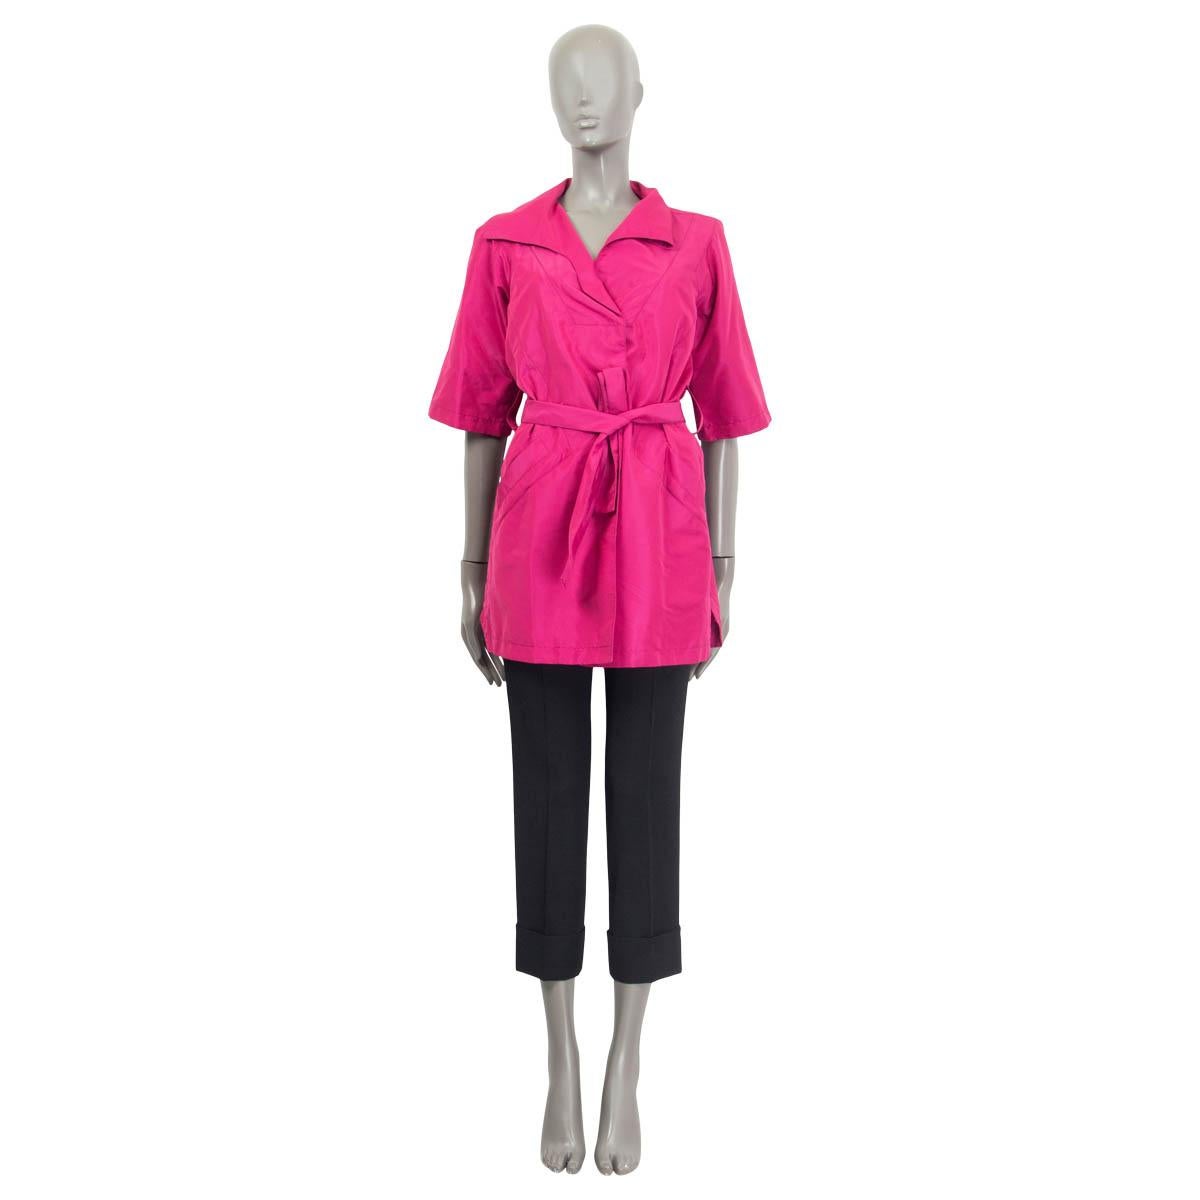 100% authentic Louis Vuitton short sleeve jacket in magenta silk (54%) and polyester (46%). Features a belt and four slit pockets on the front. Opens with three push buttons on the front. Lined in magenta silk (100%). Has been worn and is in